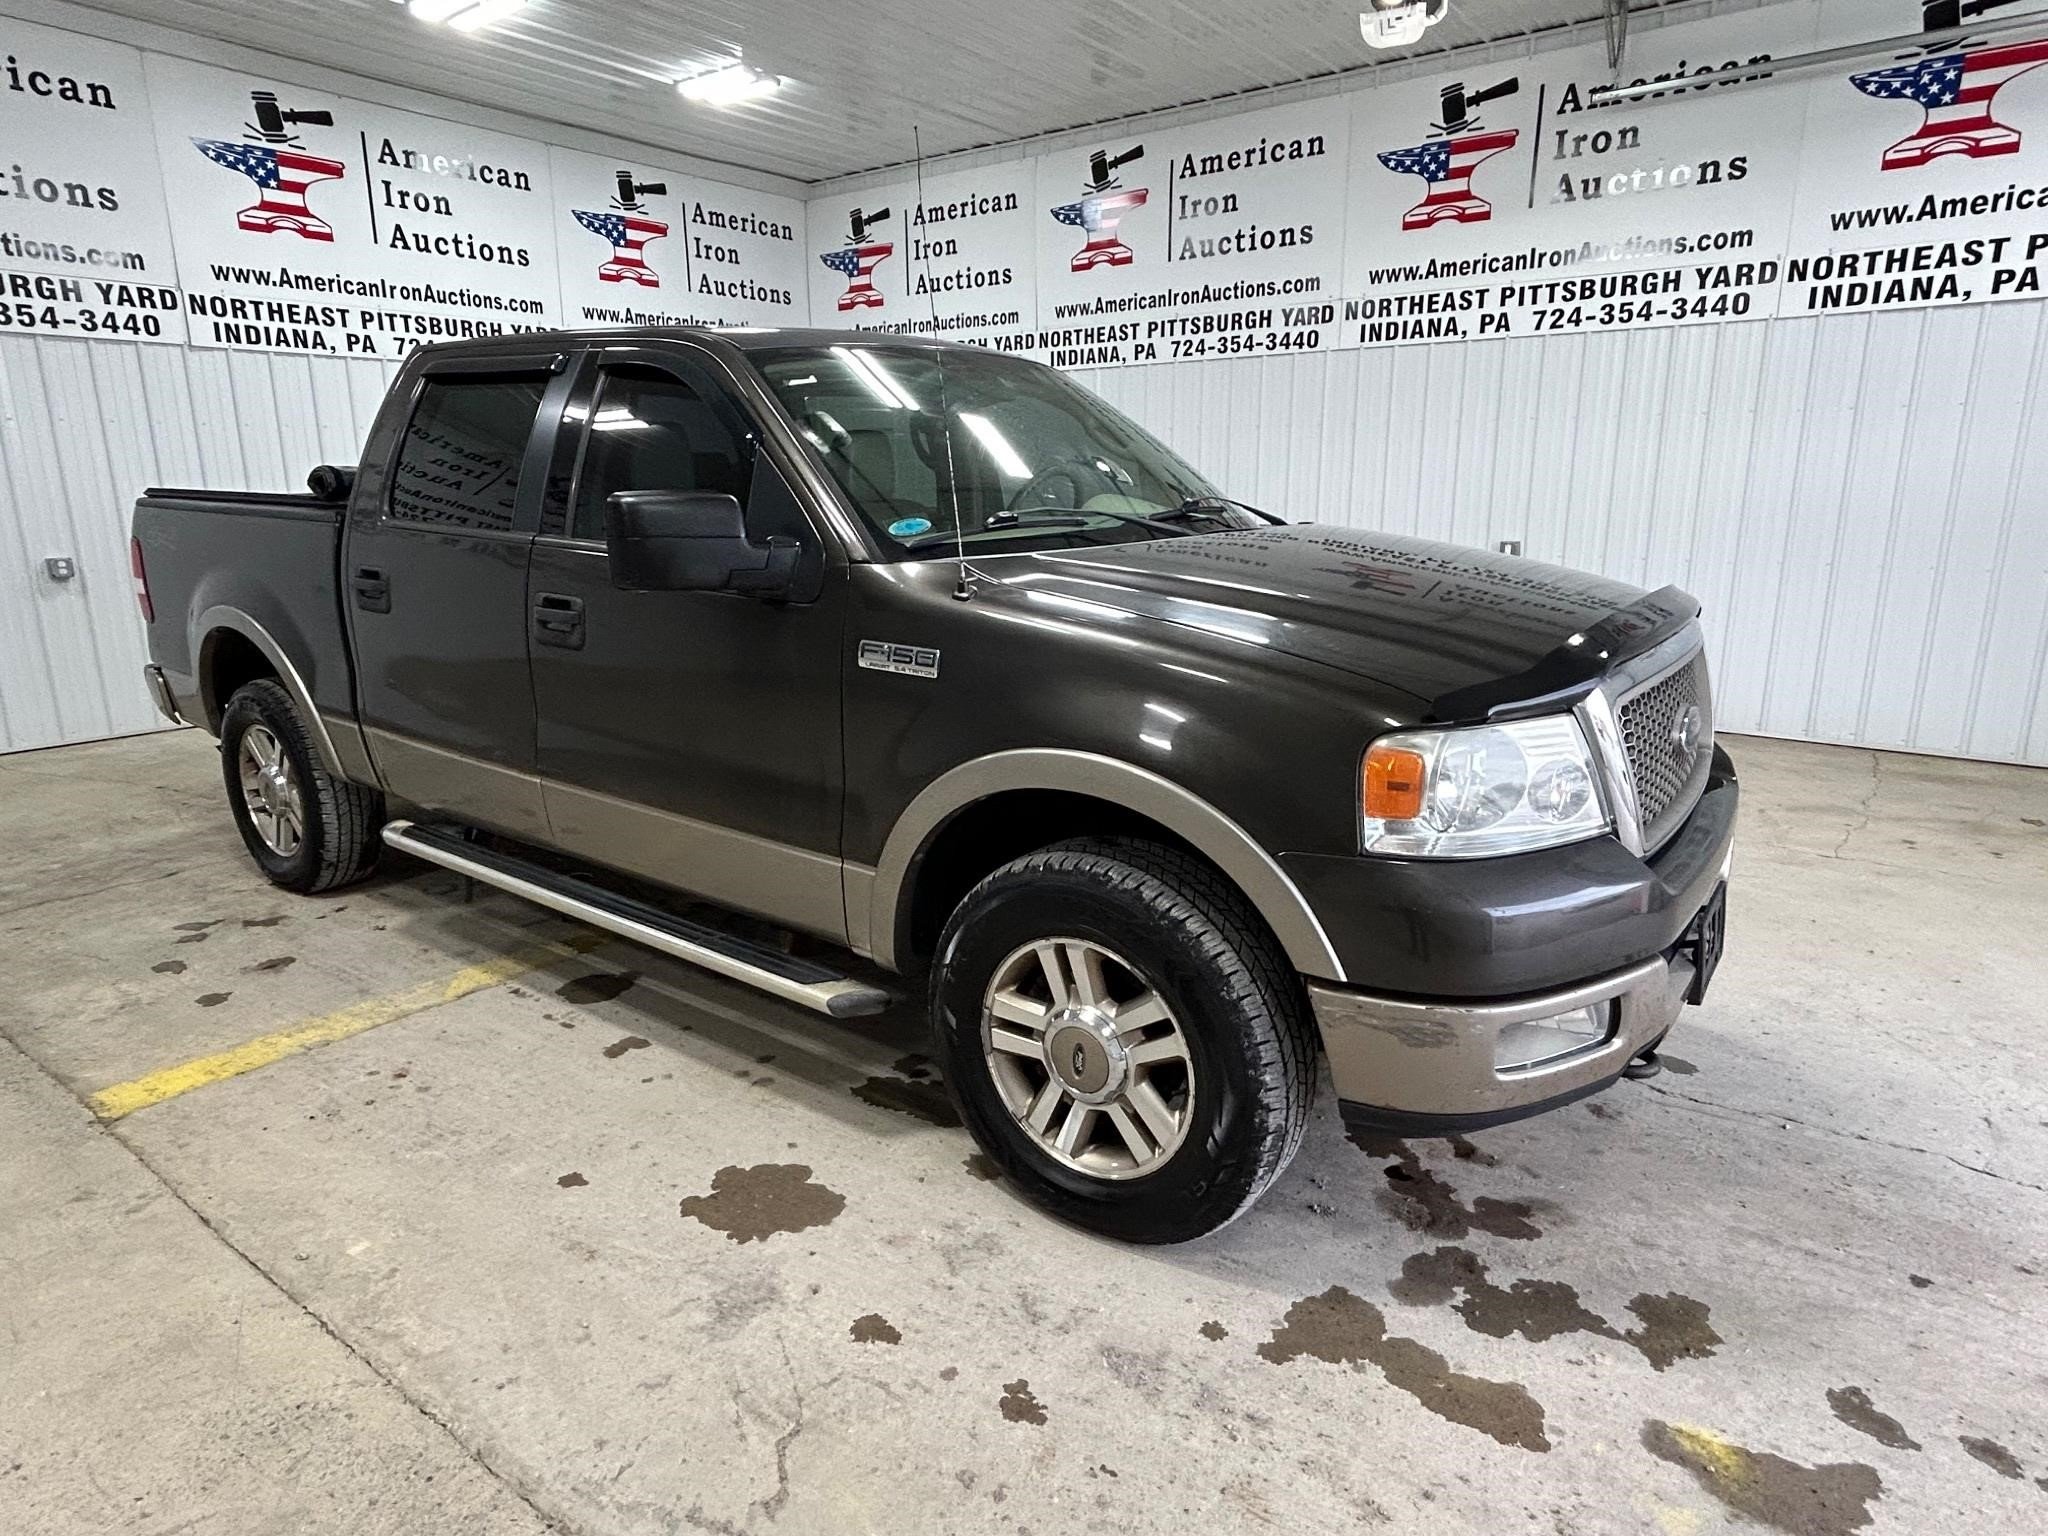 2005 Ford F150 XLT Truck-Titled-NO RESERVE